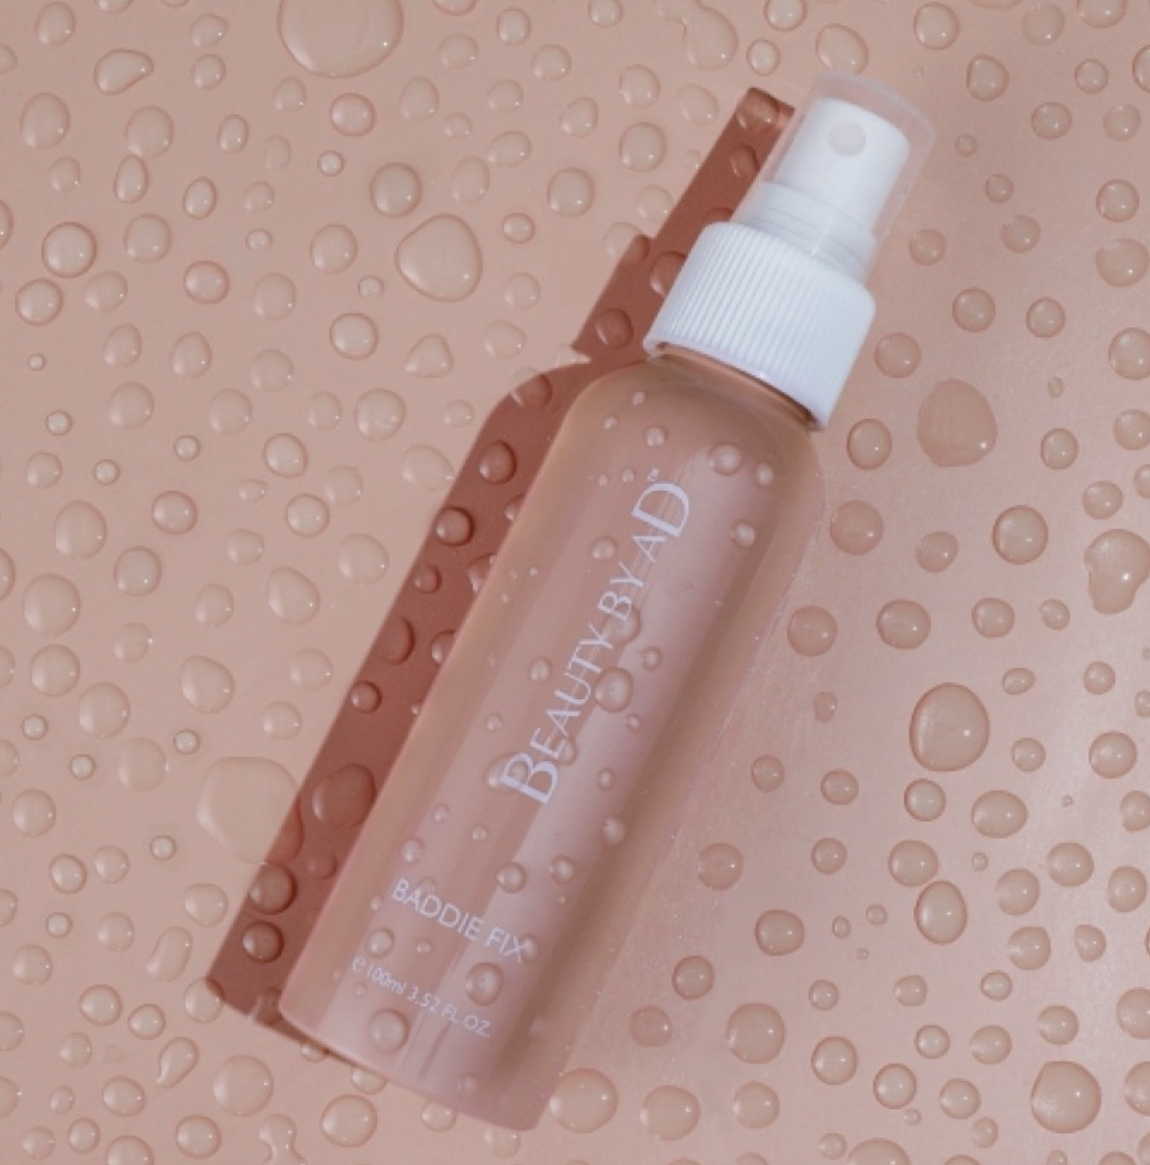 beat the heatwave - Refreshing mist by Beauty by AD